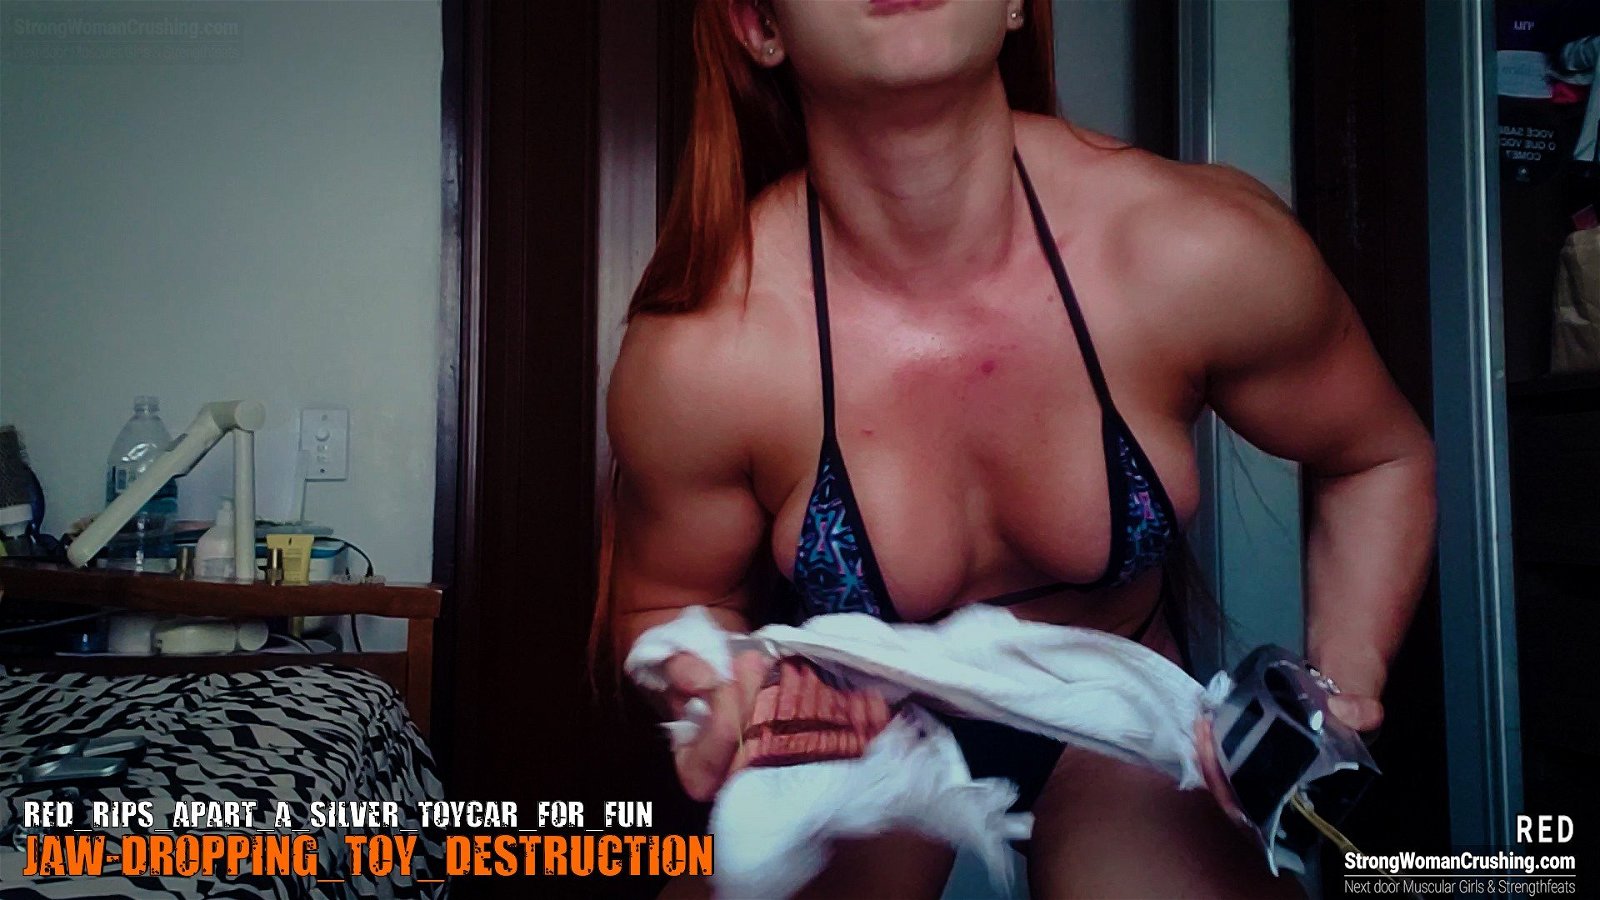 Photo by MusclegirlStrength with the username @MusclegirlStrength, who is a brand user, posted on October 12, 2023 and the text says '🔥 Watch RED unleash her power! 
💪💥 See her crush a silver toycar for pure excitement! Join the strength revolution at www.strongwomancrushing.com and witness more jaw-dropping feats of muscle domination! 
🚗💥 #MuscularWomen #FeatsOfStrength...'